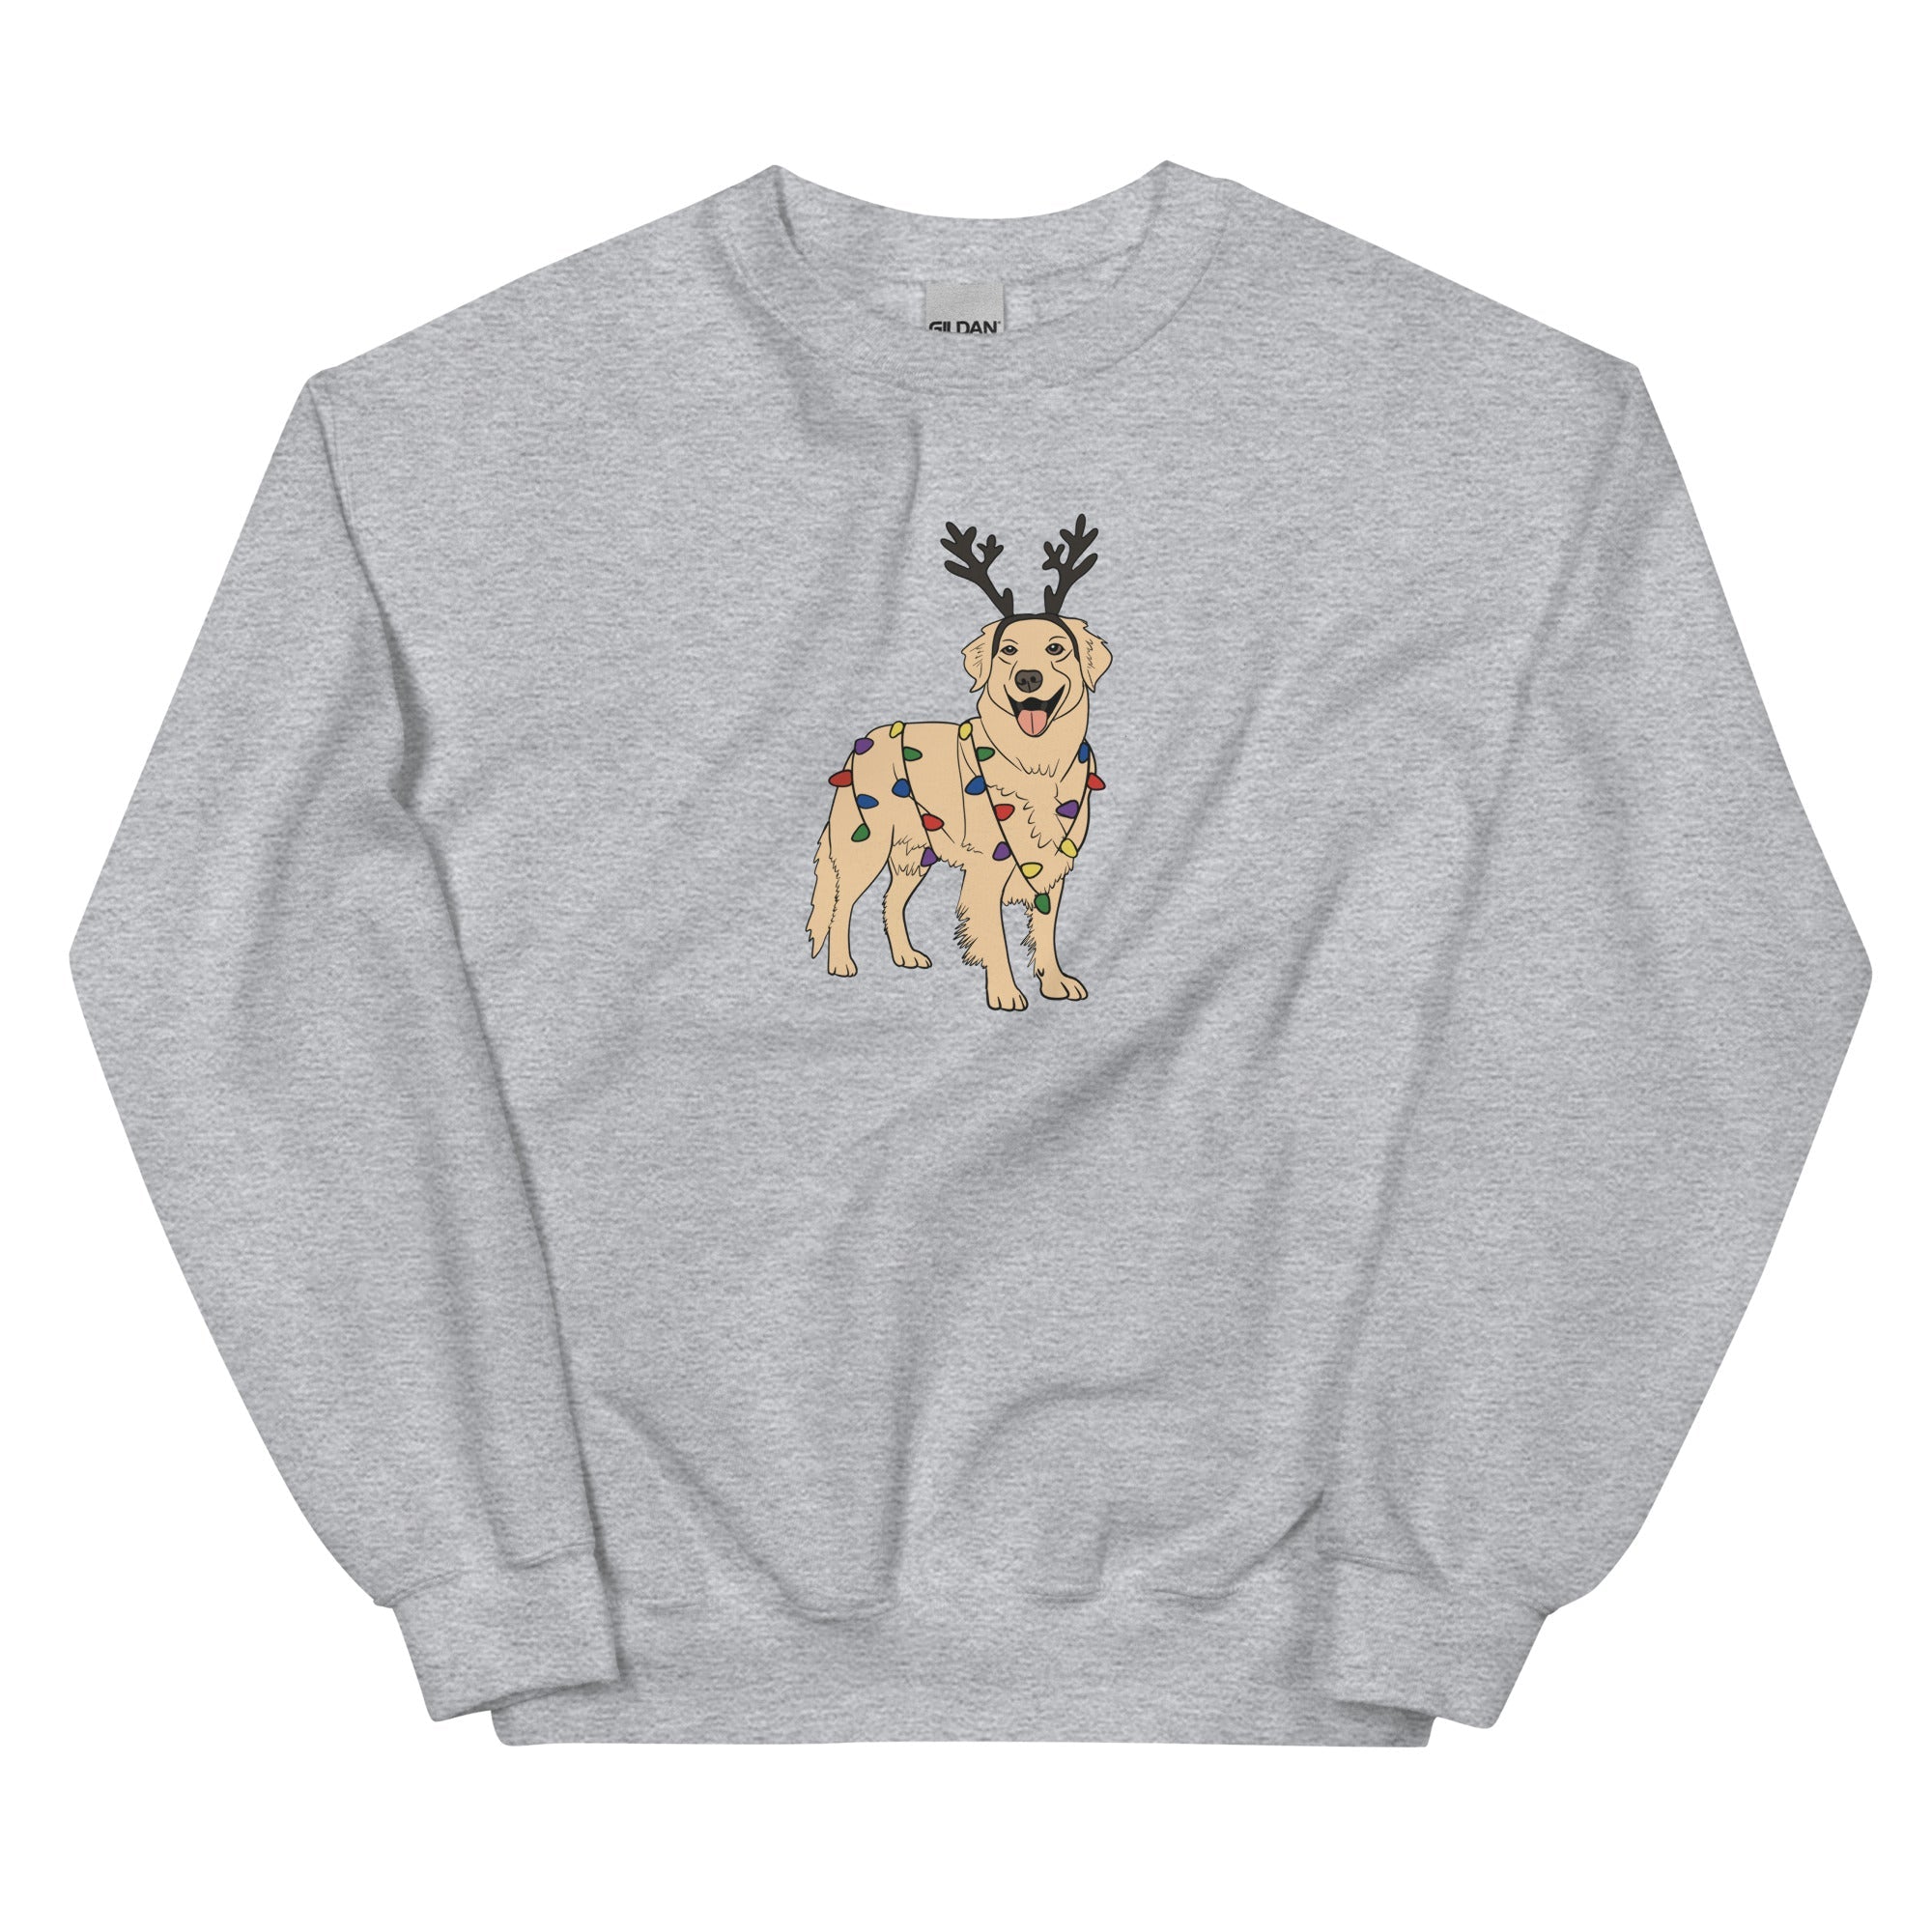 Getting in the Holiday Spirit Crewneck Sweatshirt - TAILWAGS UNLIMITED